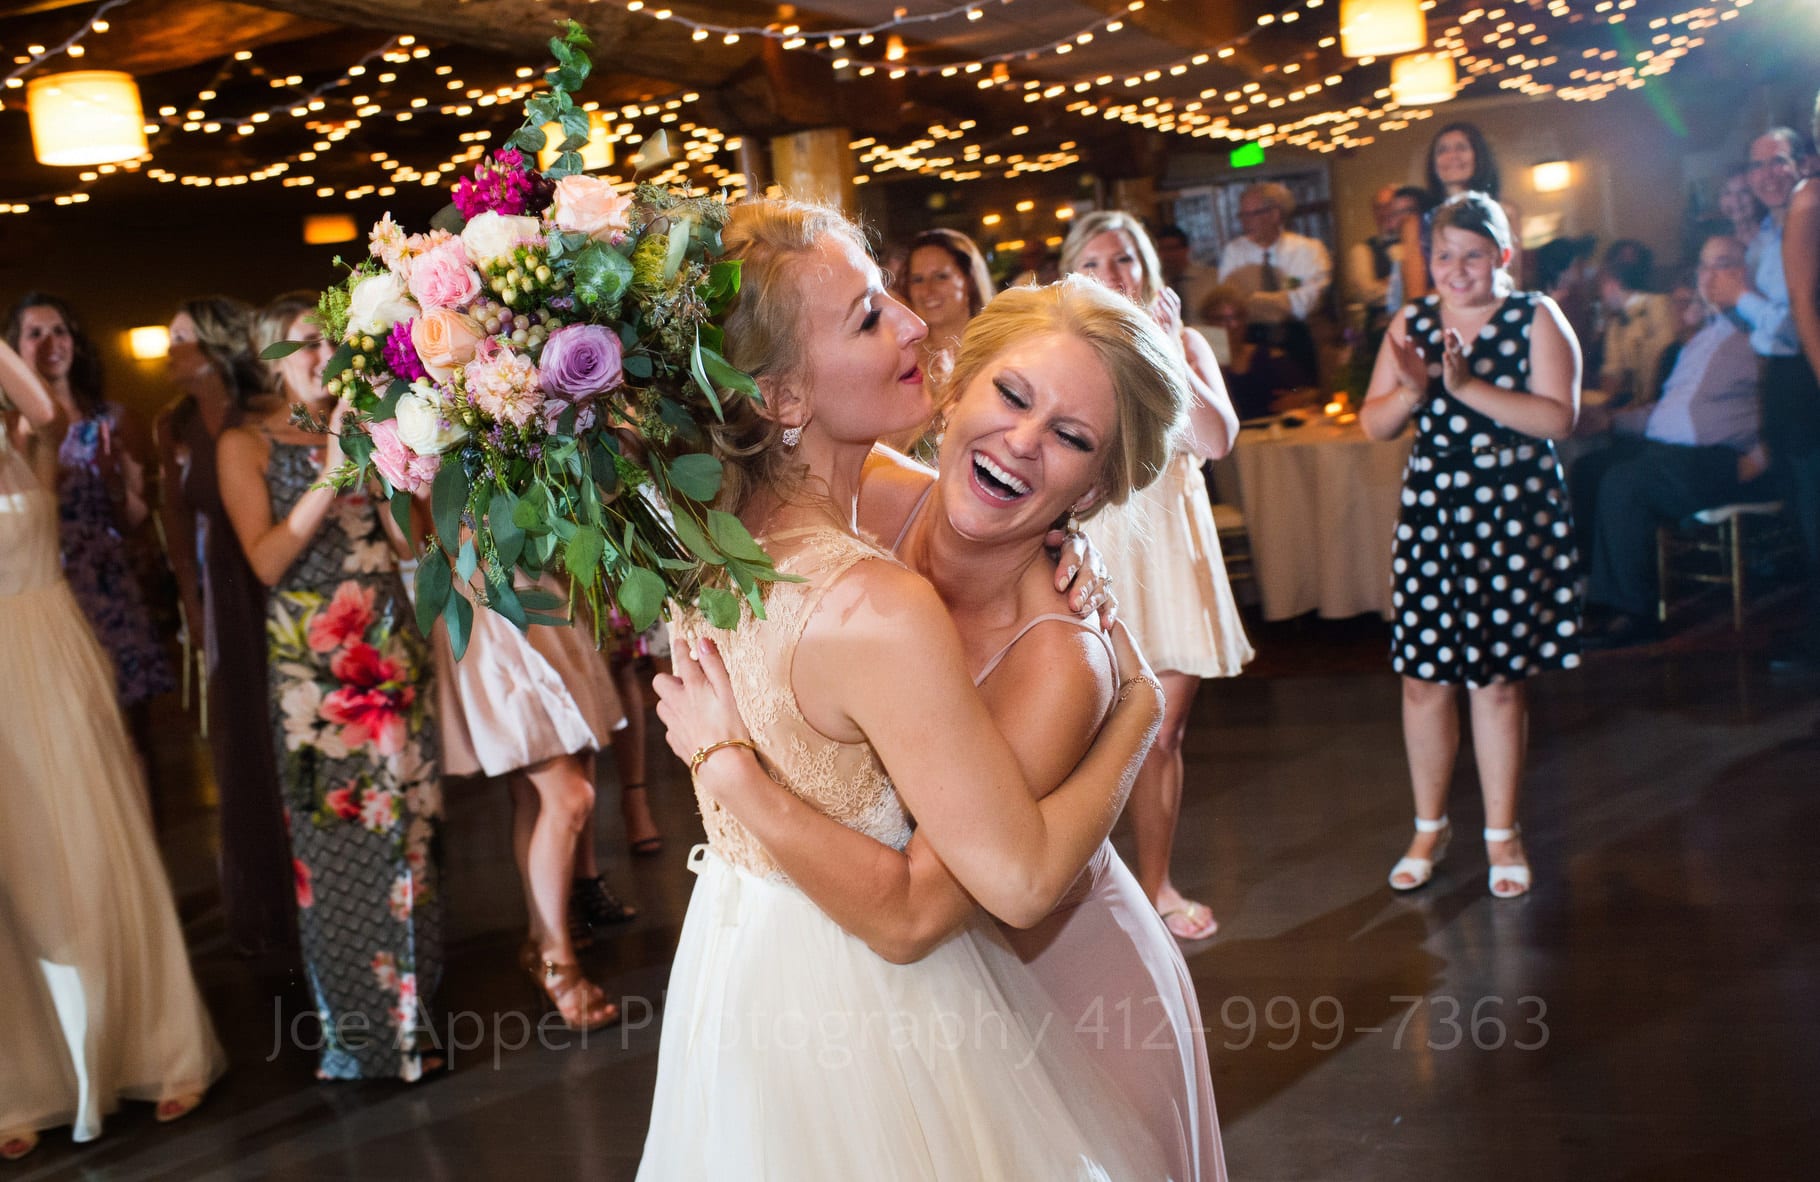 Bride is embraced by a laughing bridesmaid who holds the large bouquet that she just caught in her hand during their Seven Springs Wedding.